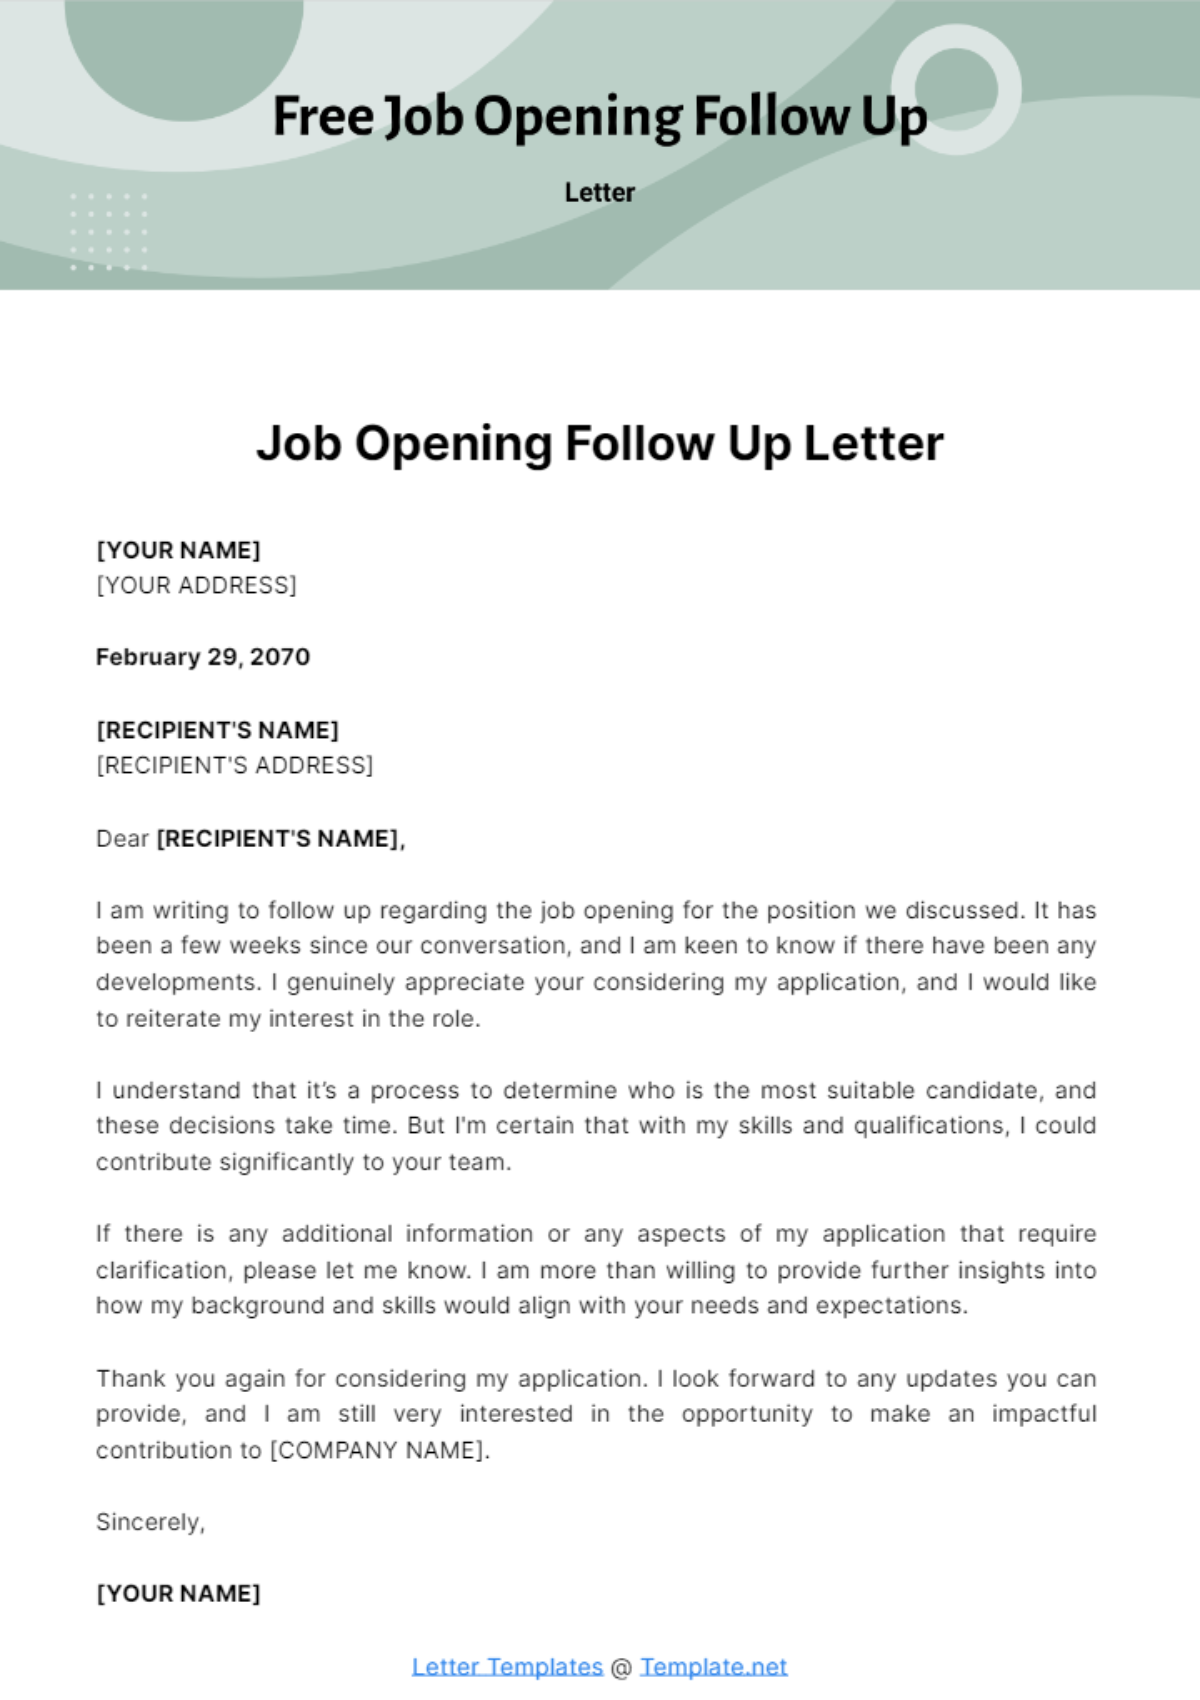 Free Job Opening Follow Up Letter Template